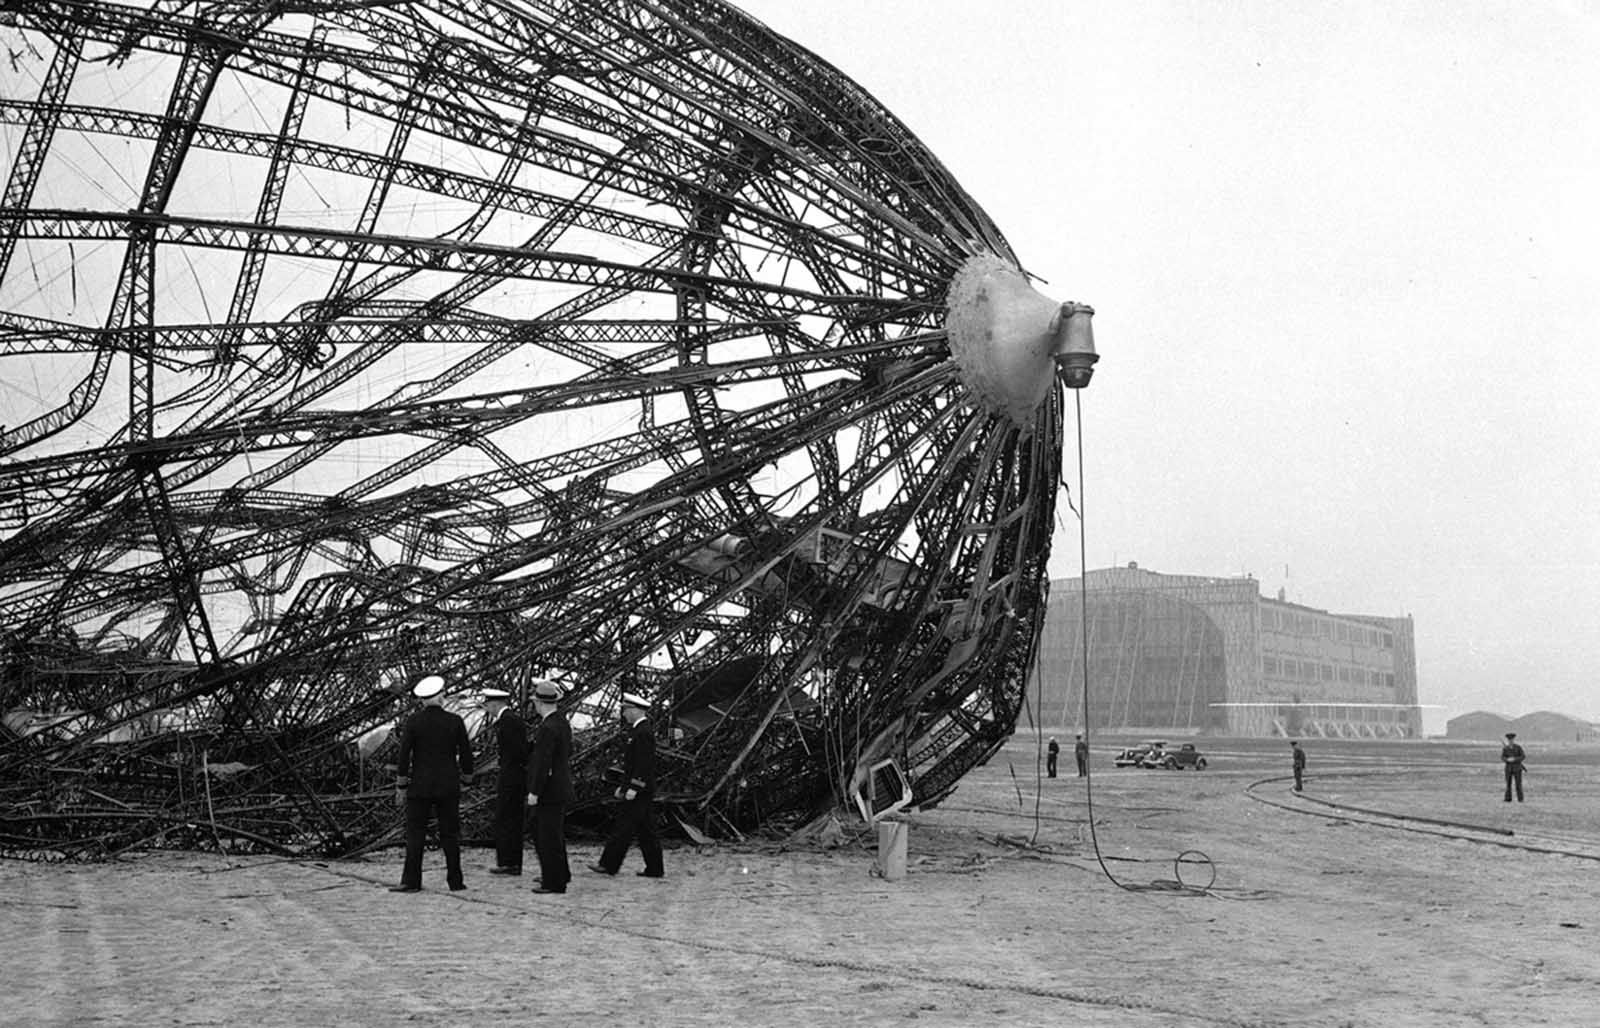 Members of the U.S. Navy Board of Inquiry inspect the wreckage of the German zeppelin Hindenburg on the field in New Jersey, on May 8, 1937.